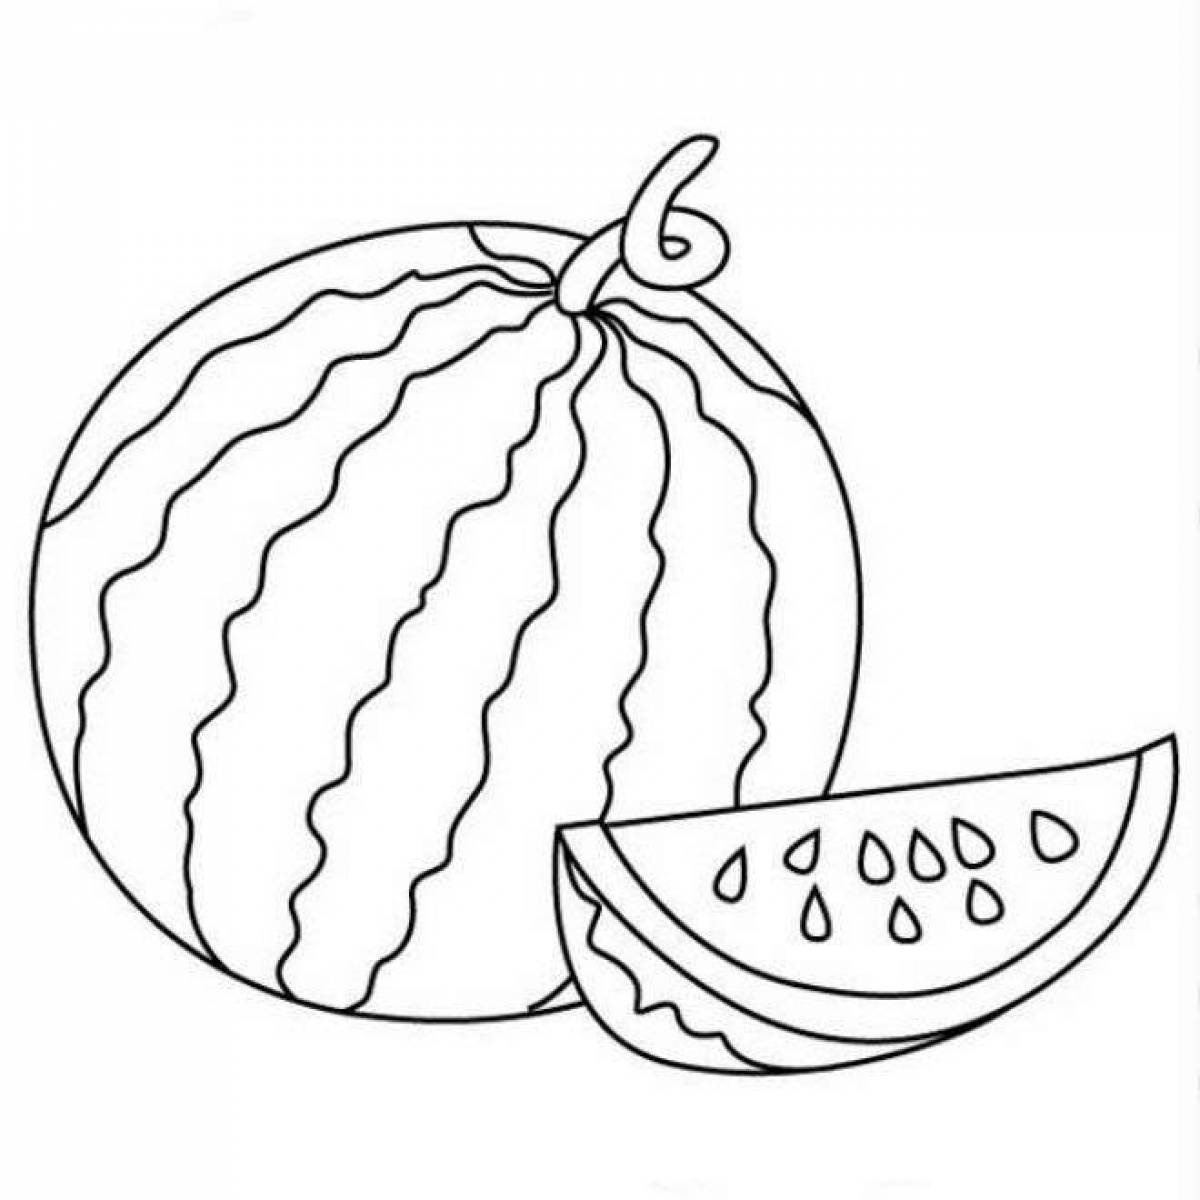 Exciting watermelon coloring book for kids